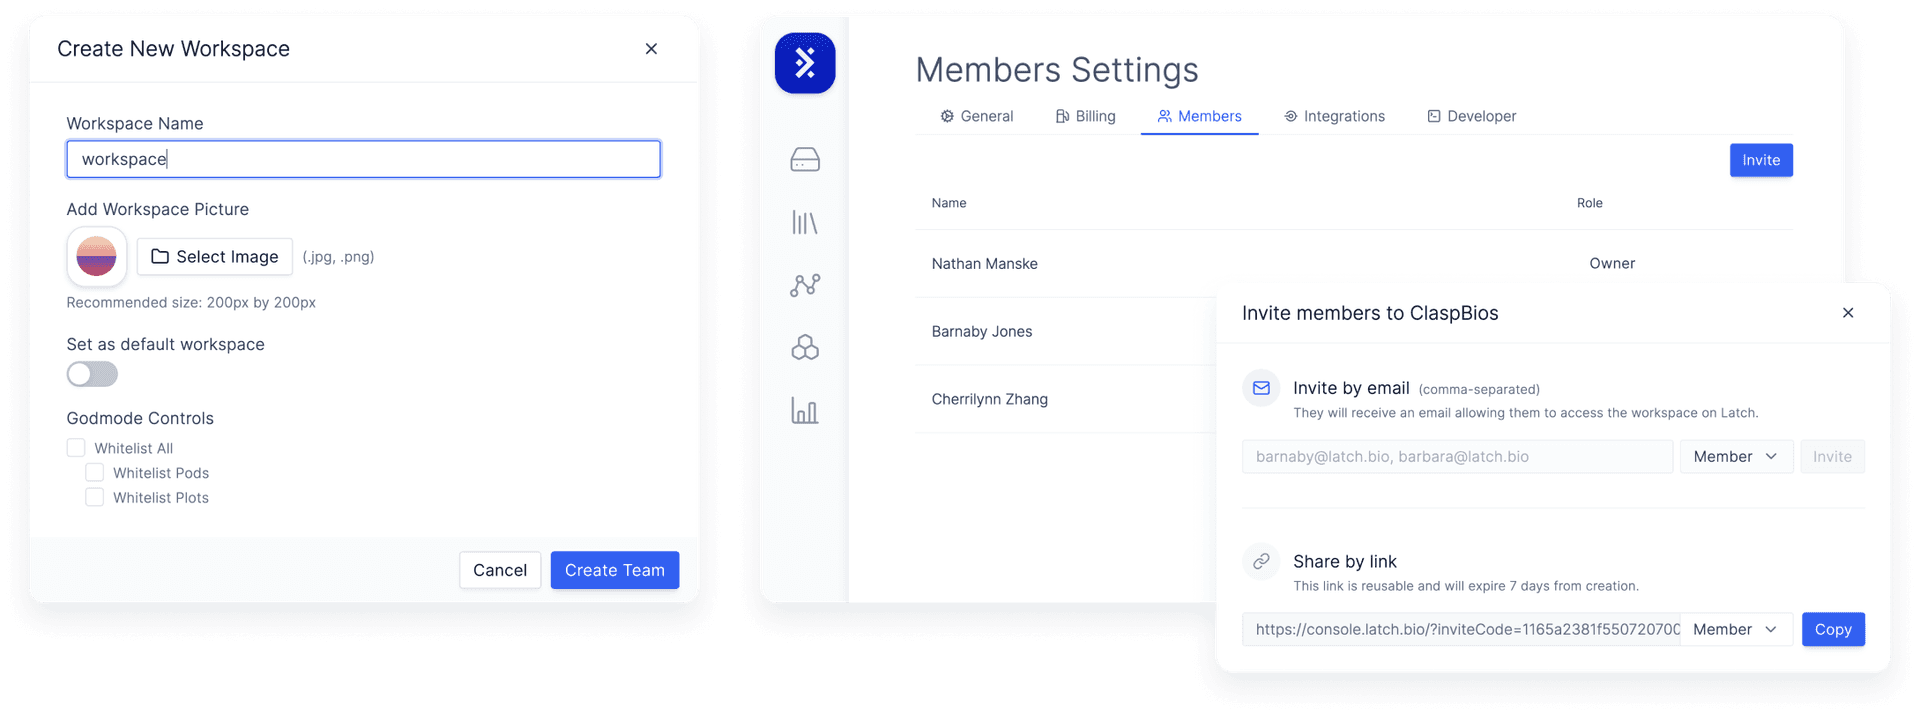 Workspace where you can customize workspace and and icon, view members and member role, and invite members by link or email.